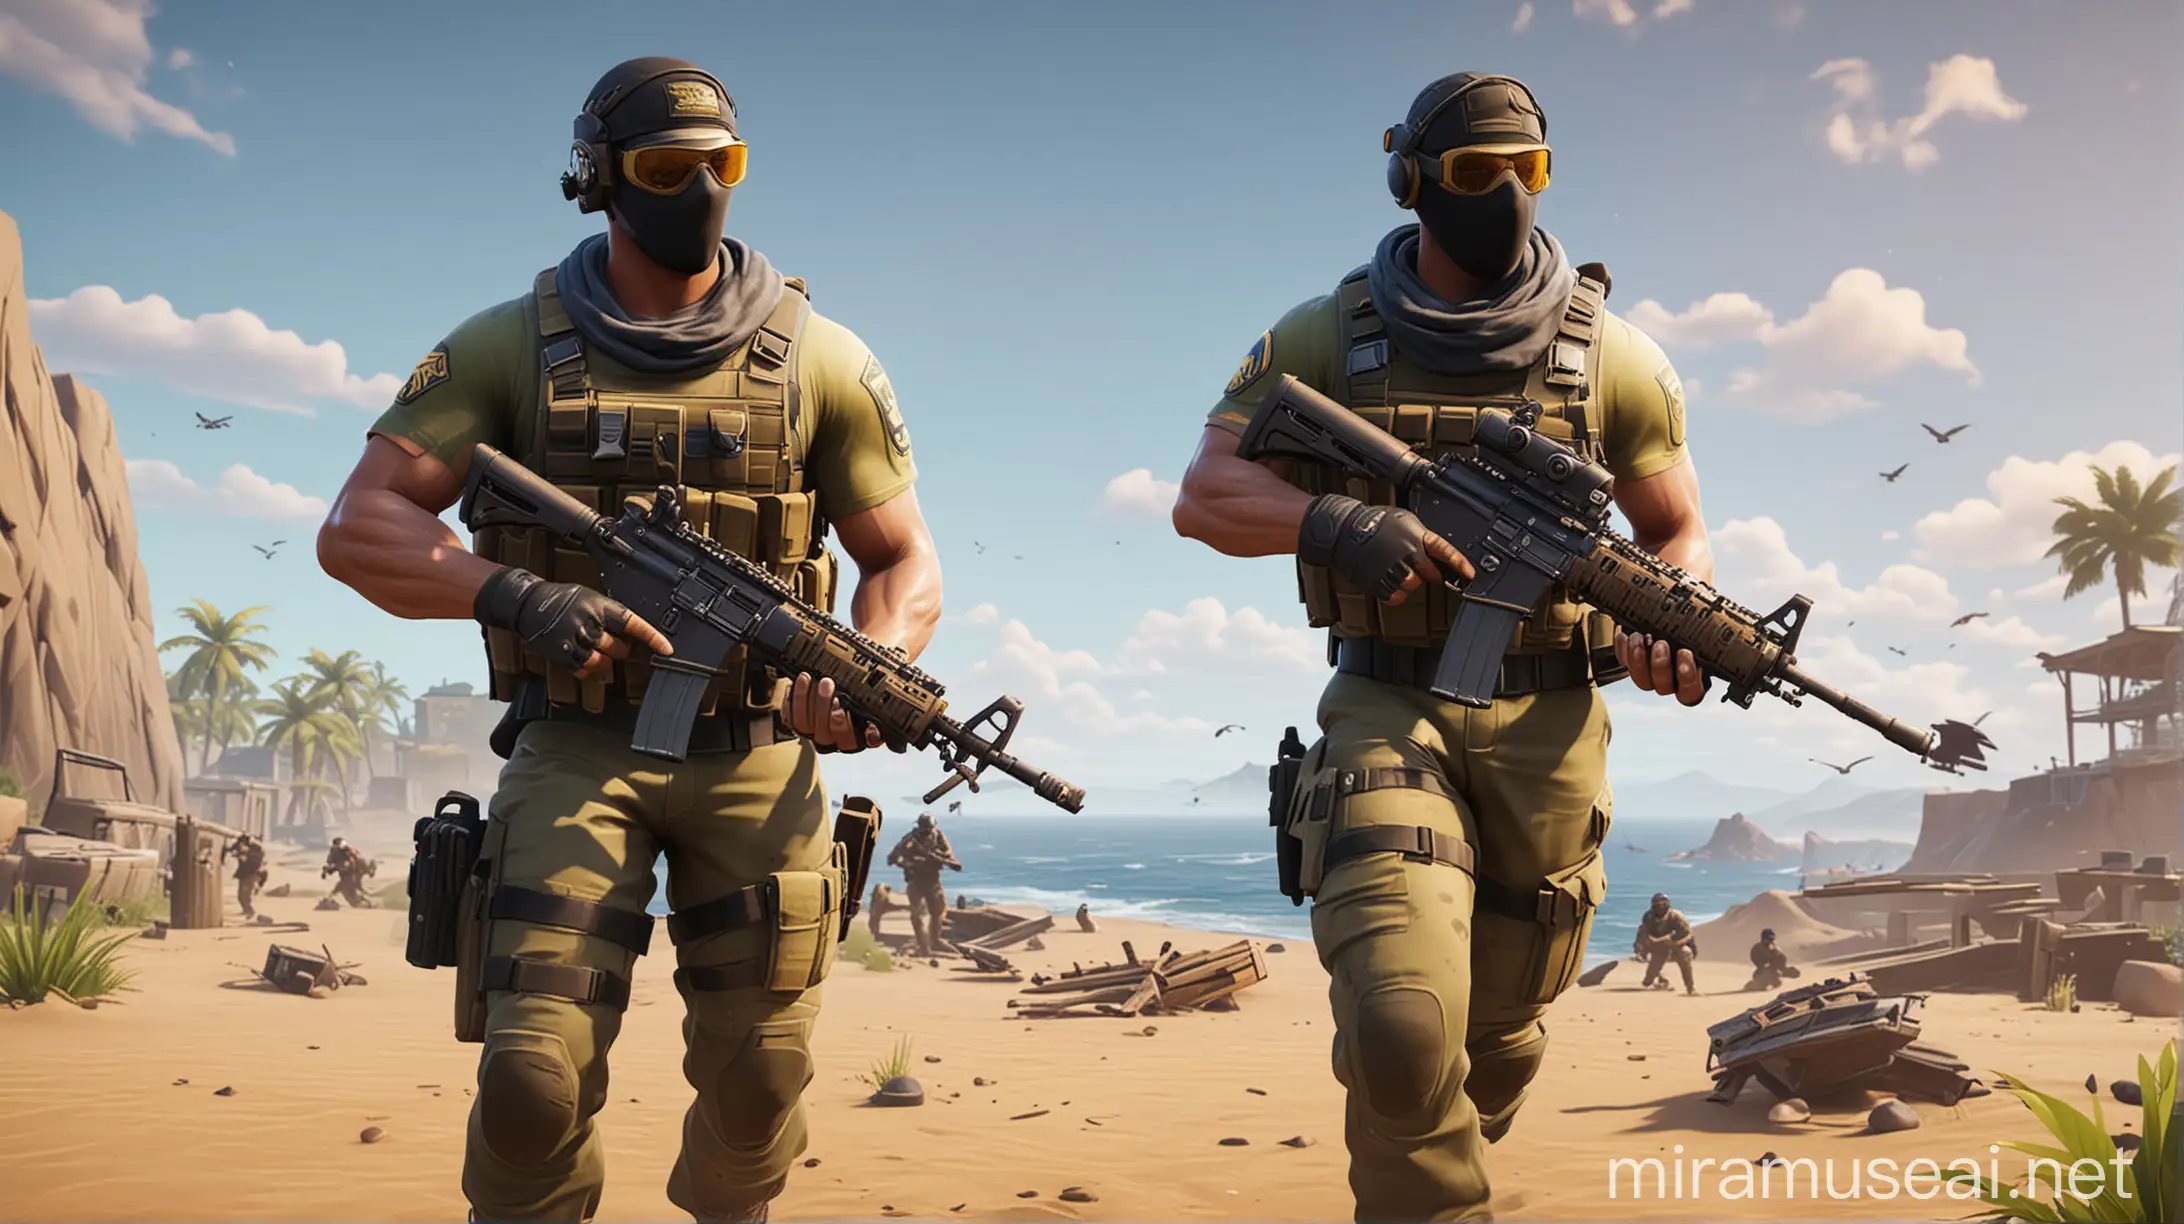 Navy SEAL Combatting Terrorists in a FortniteInspired Battle